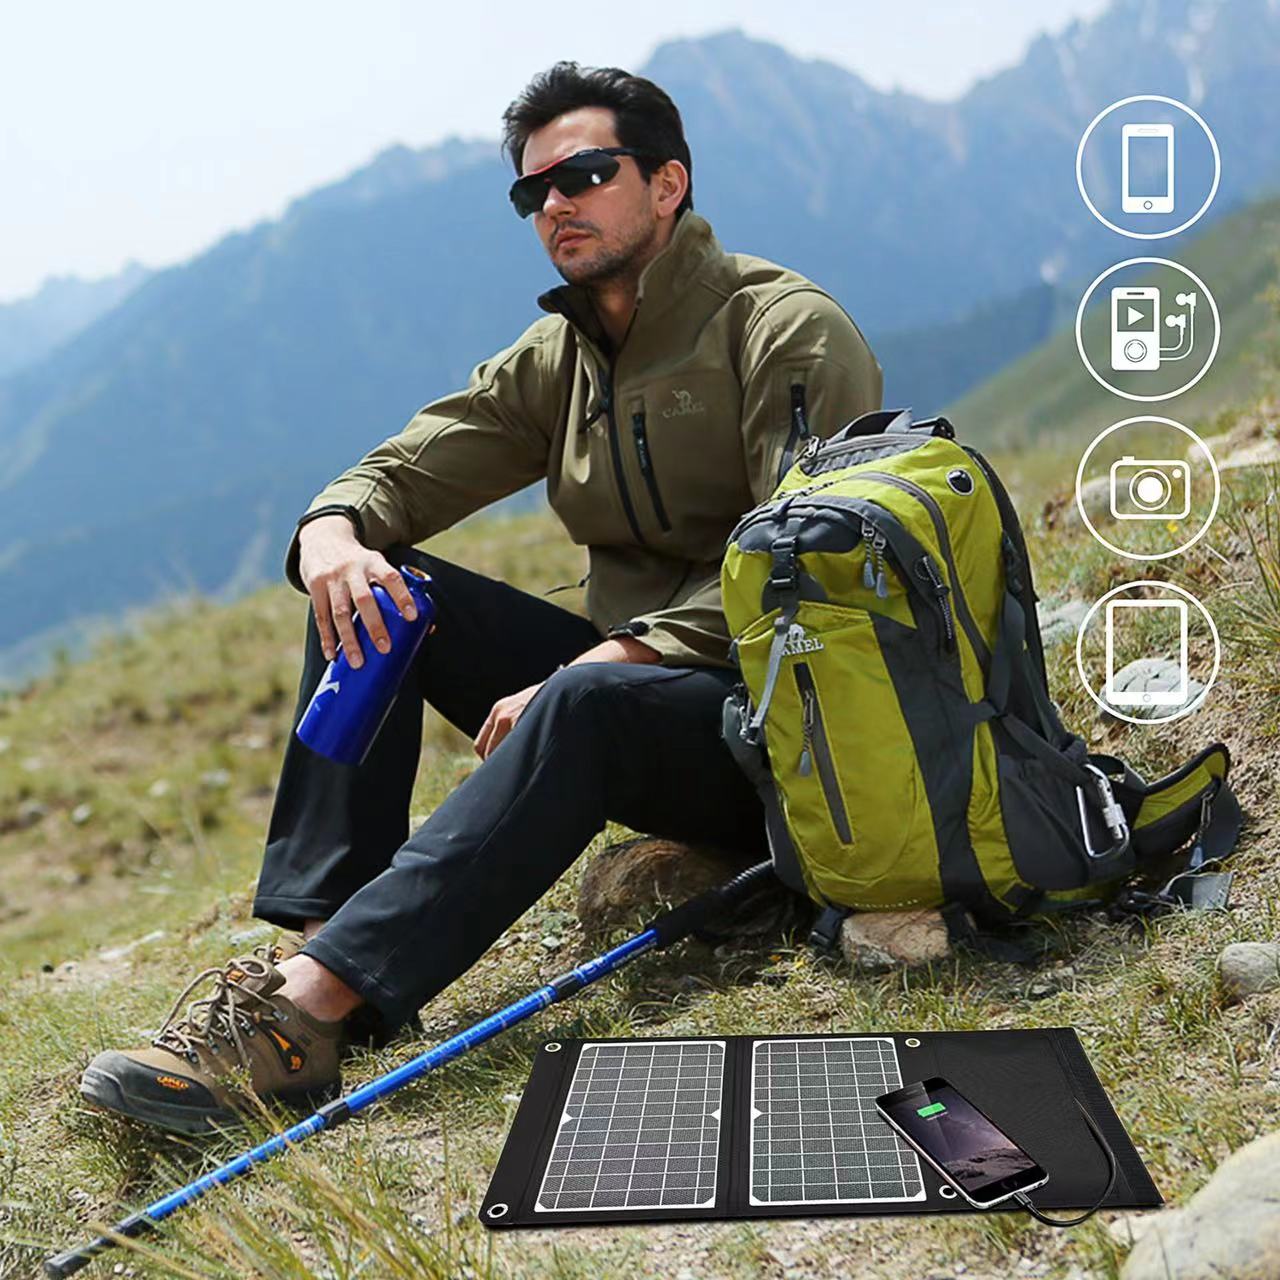 EFTE Solar Panels 15W prowerful Power Bank 5V 2USB Portable solar better generator For mobile phone laptop camping outdoor